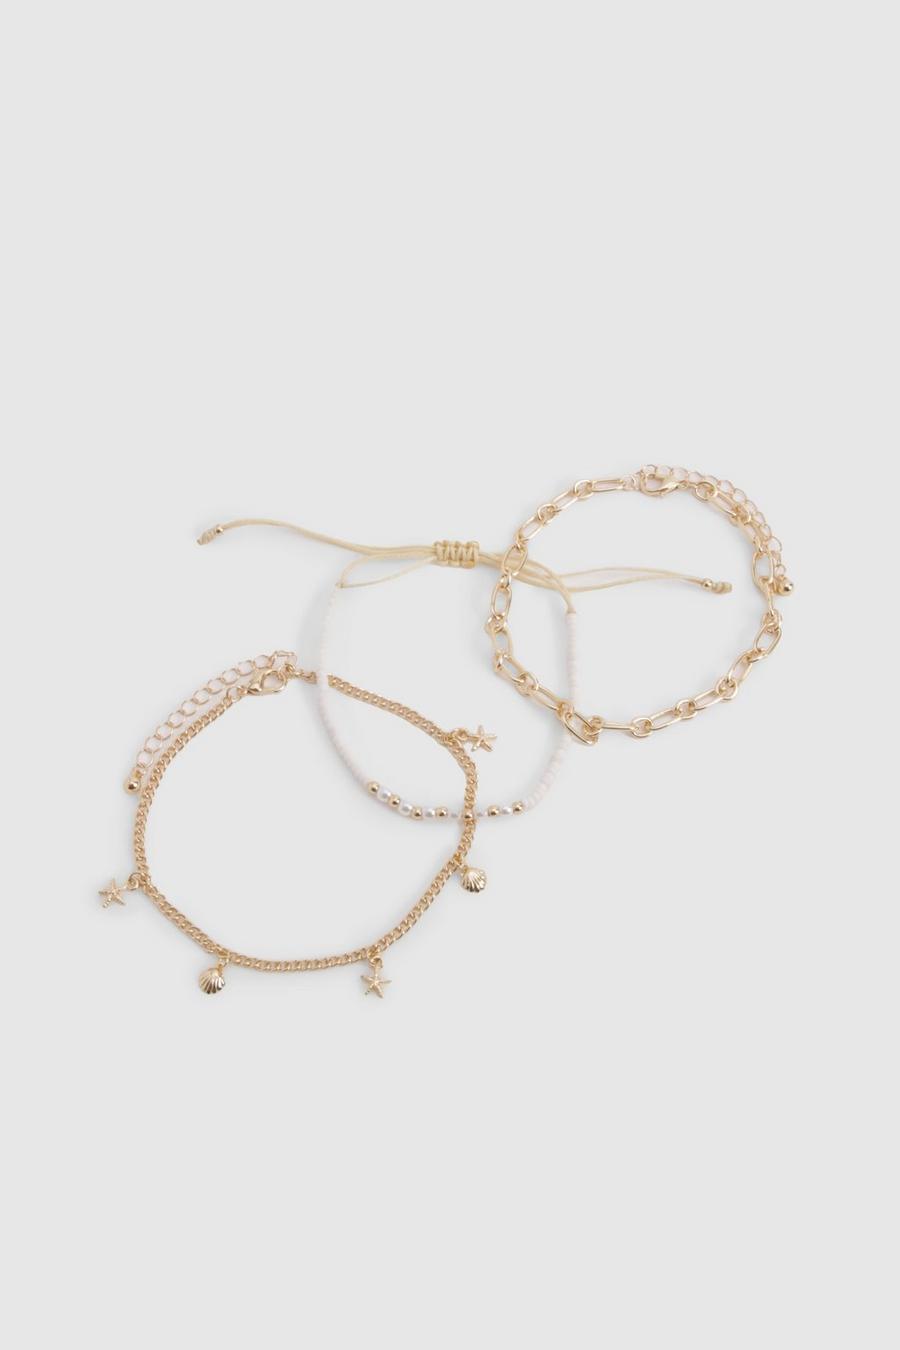 Gold Starfish Charm Anklet 3 Pack 